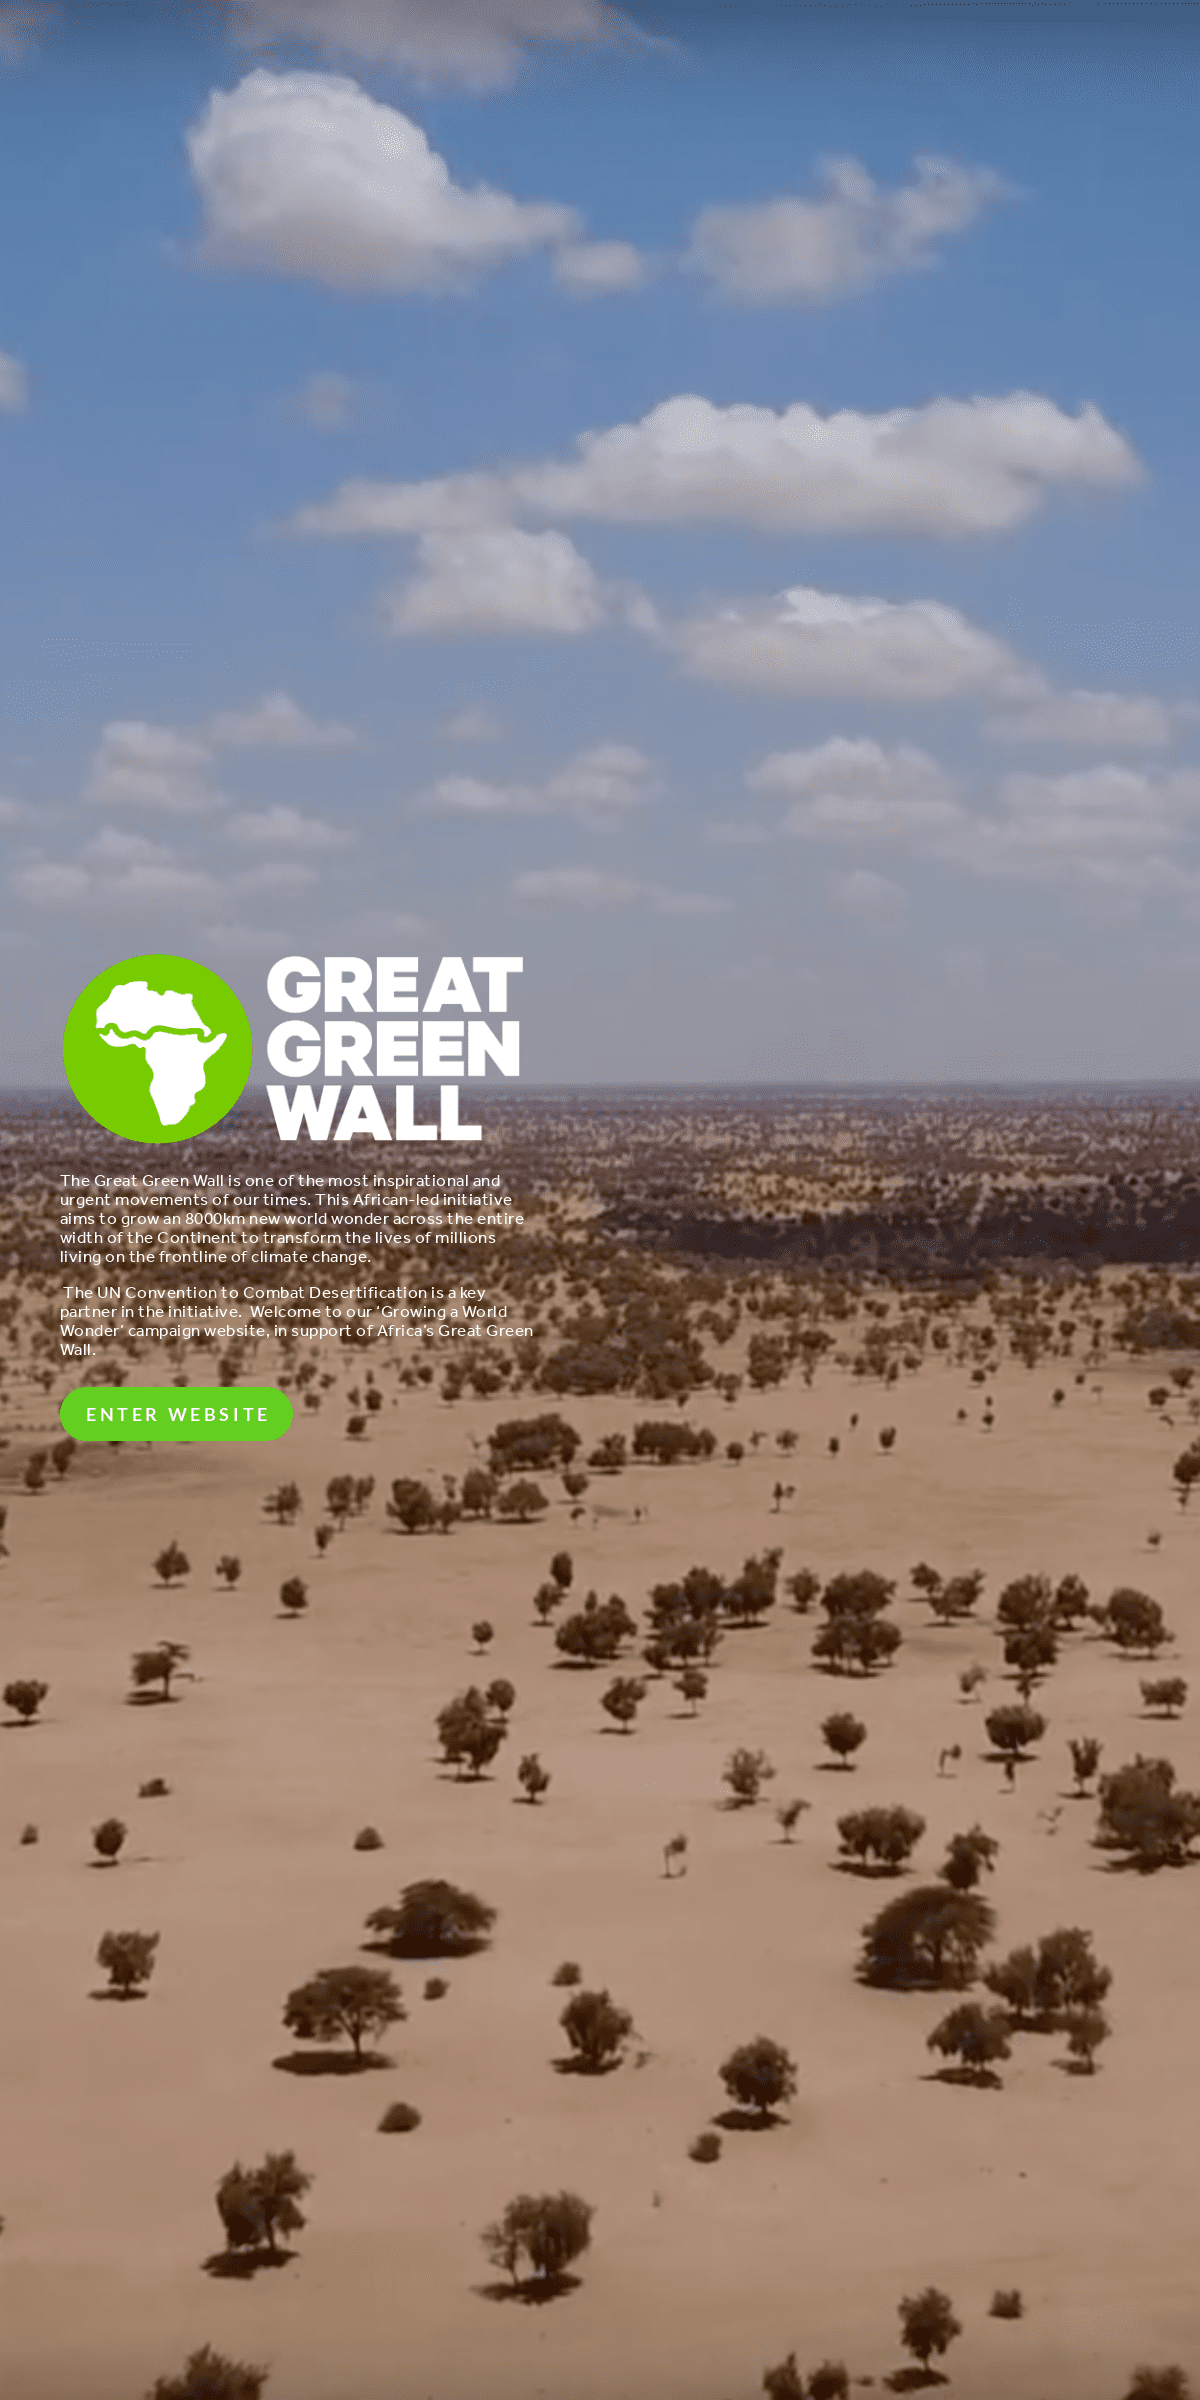 A complete backup of greatgreenwall.org